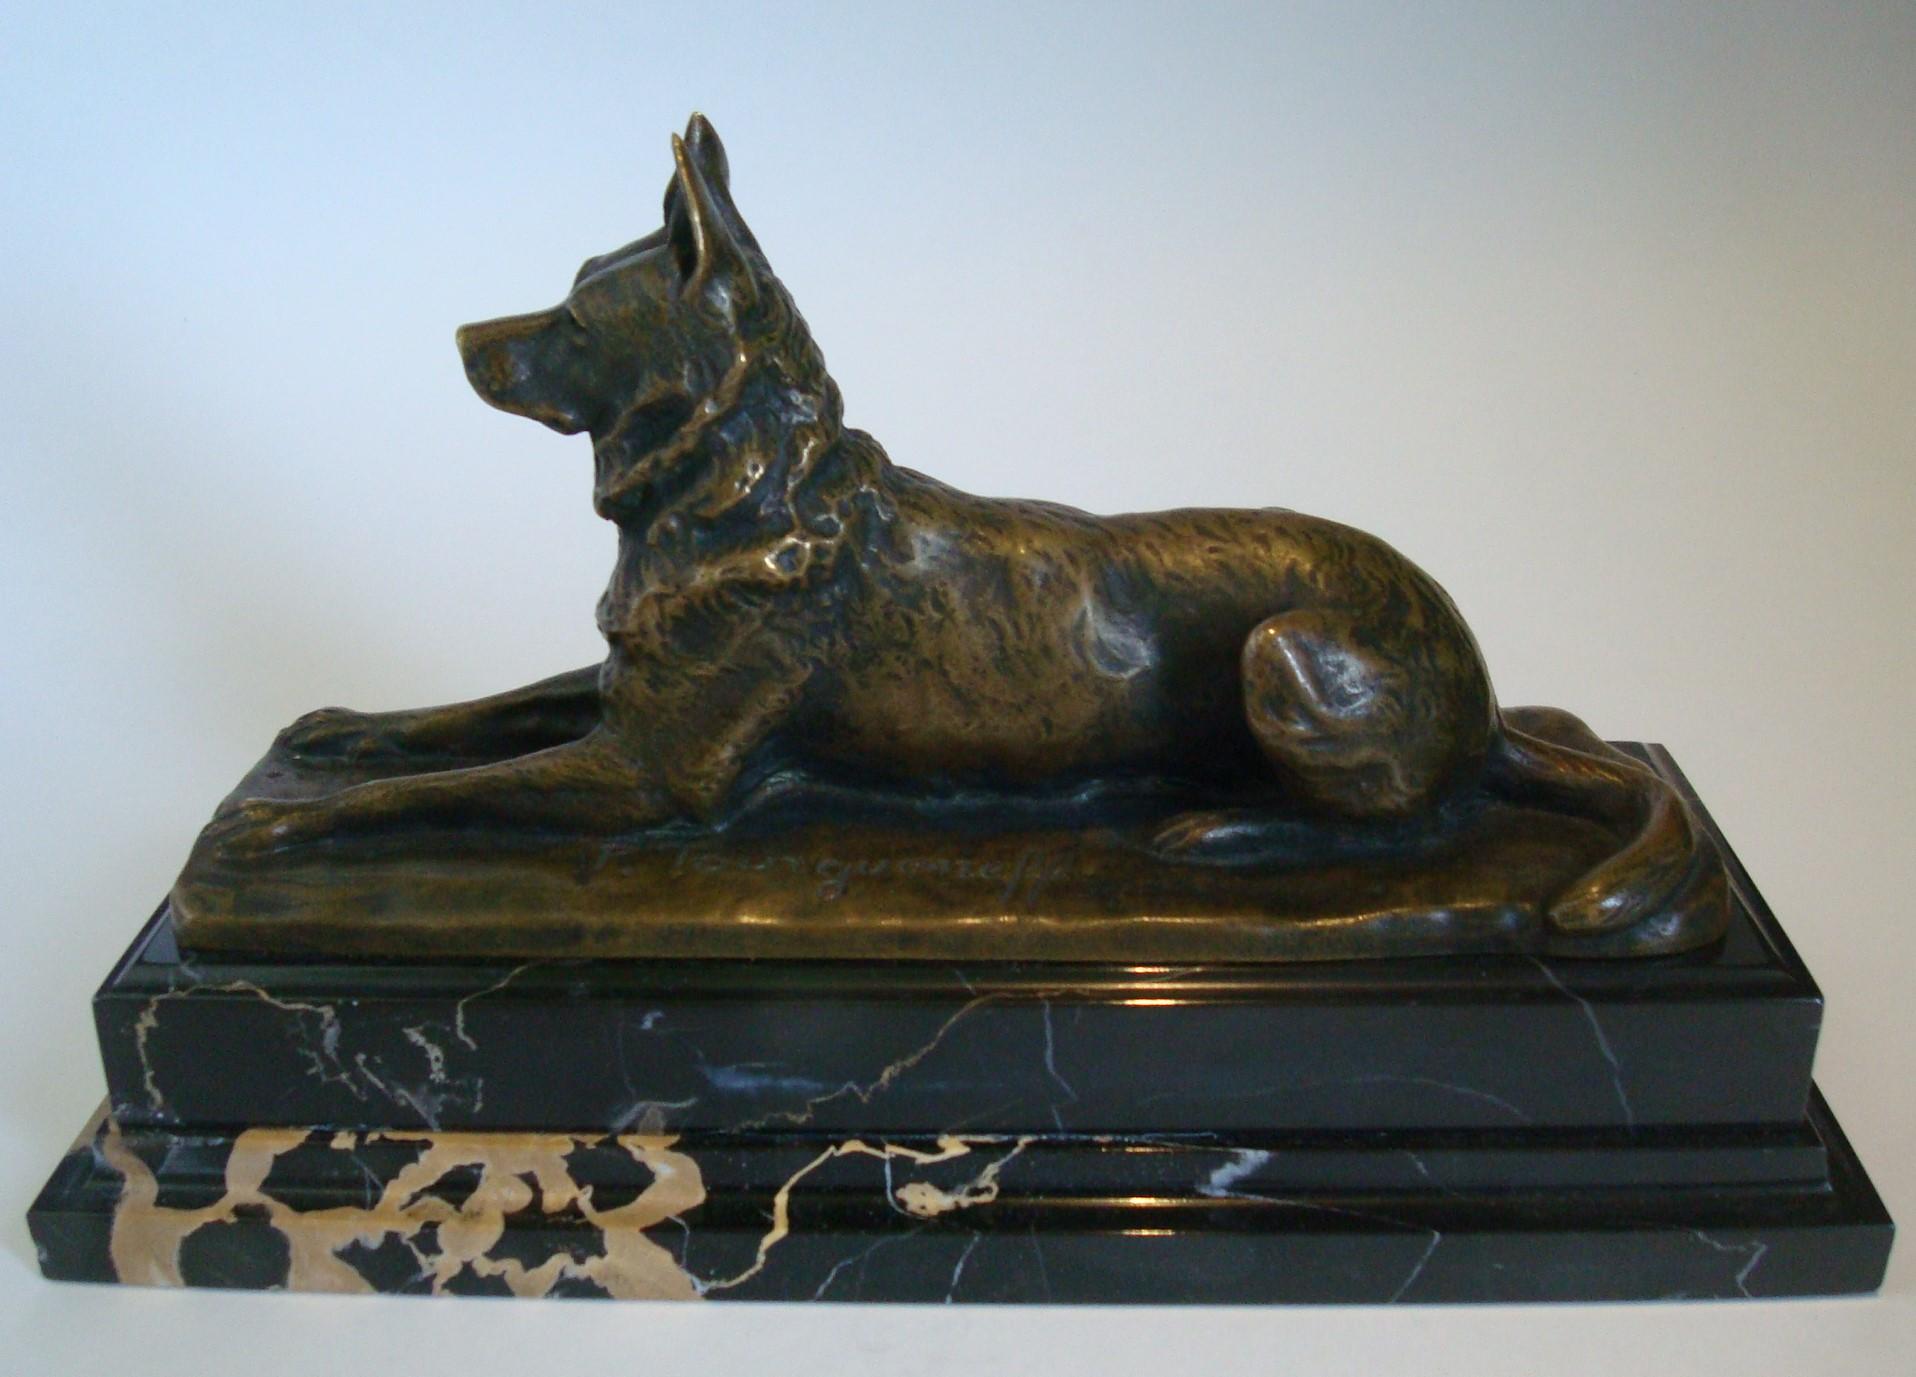 Antique German Shepherd bronze sculpture of dog by Pierre Nicolas Tourgueneff. France Late 19th century - early 20th Century. Cast after the model of Pierre Nicolas Tourgueneff. 
On a naturalistic rectangular base, realistically modelled as